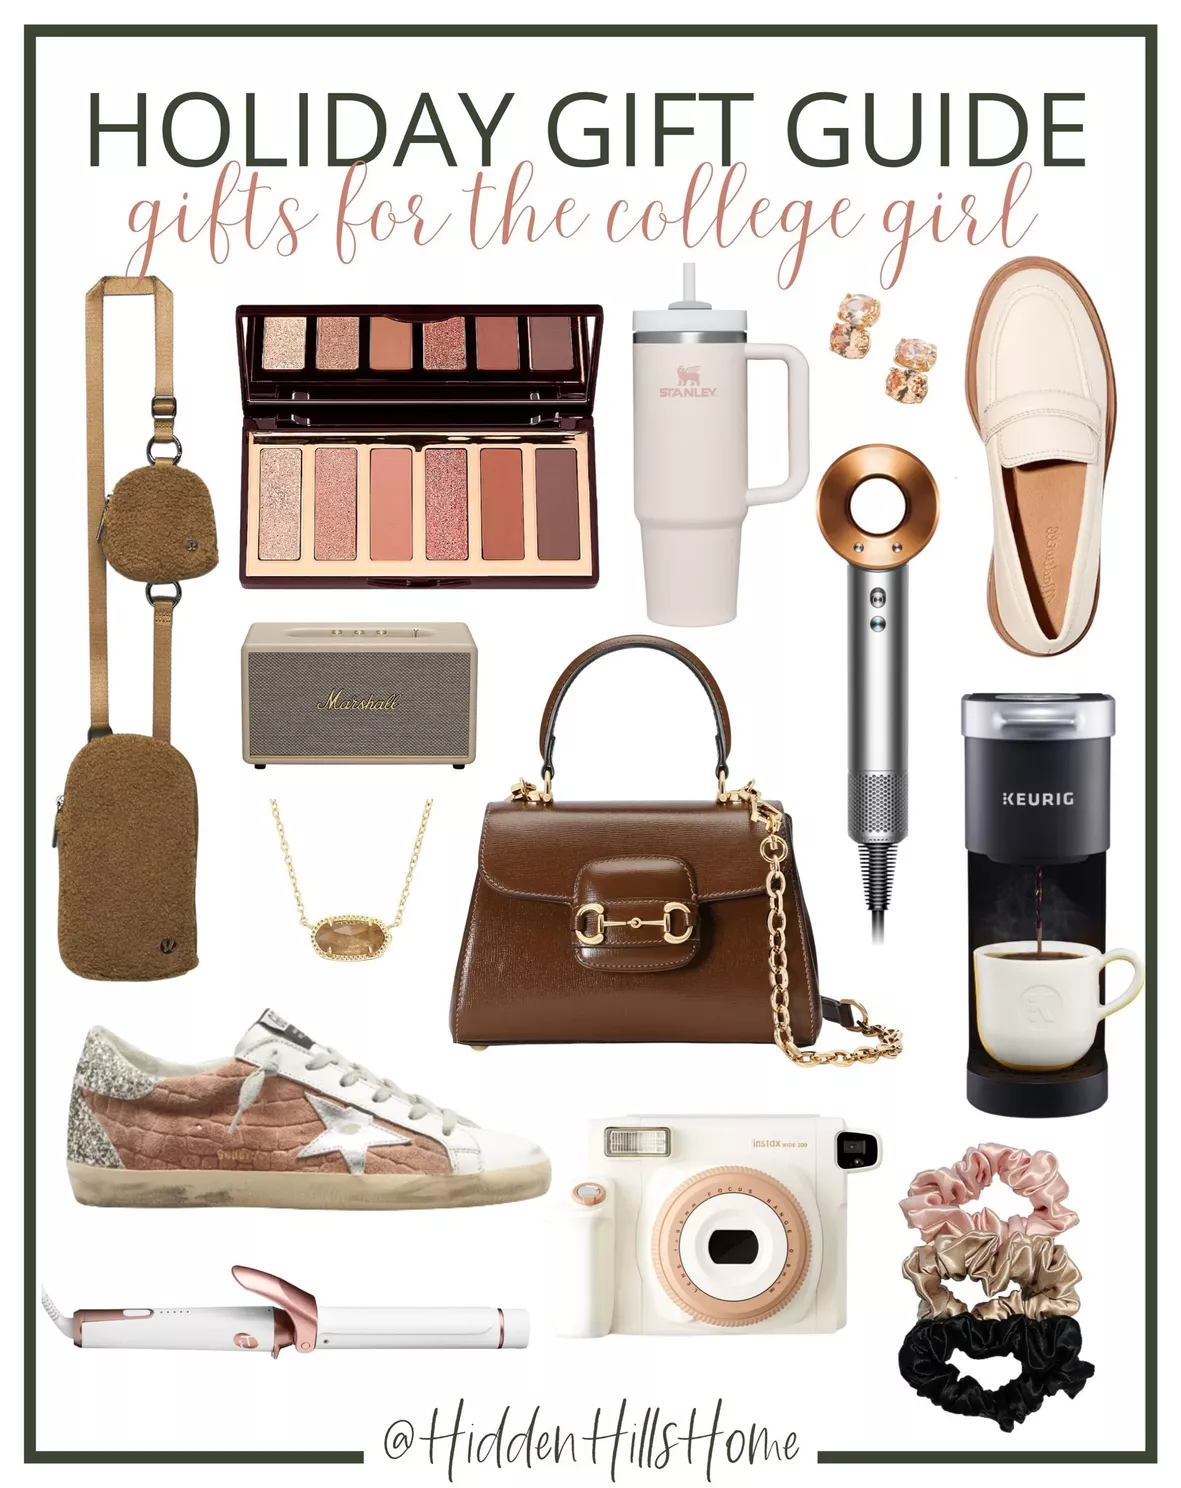 Christmas gift guide for her, Christmas gifts for her, girly girls